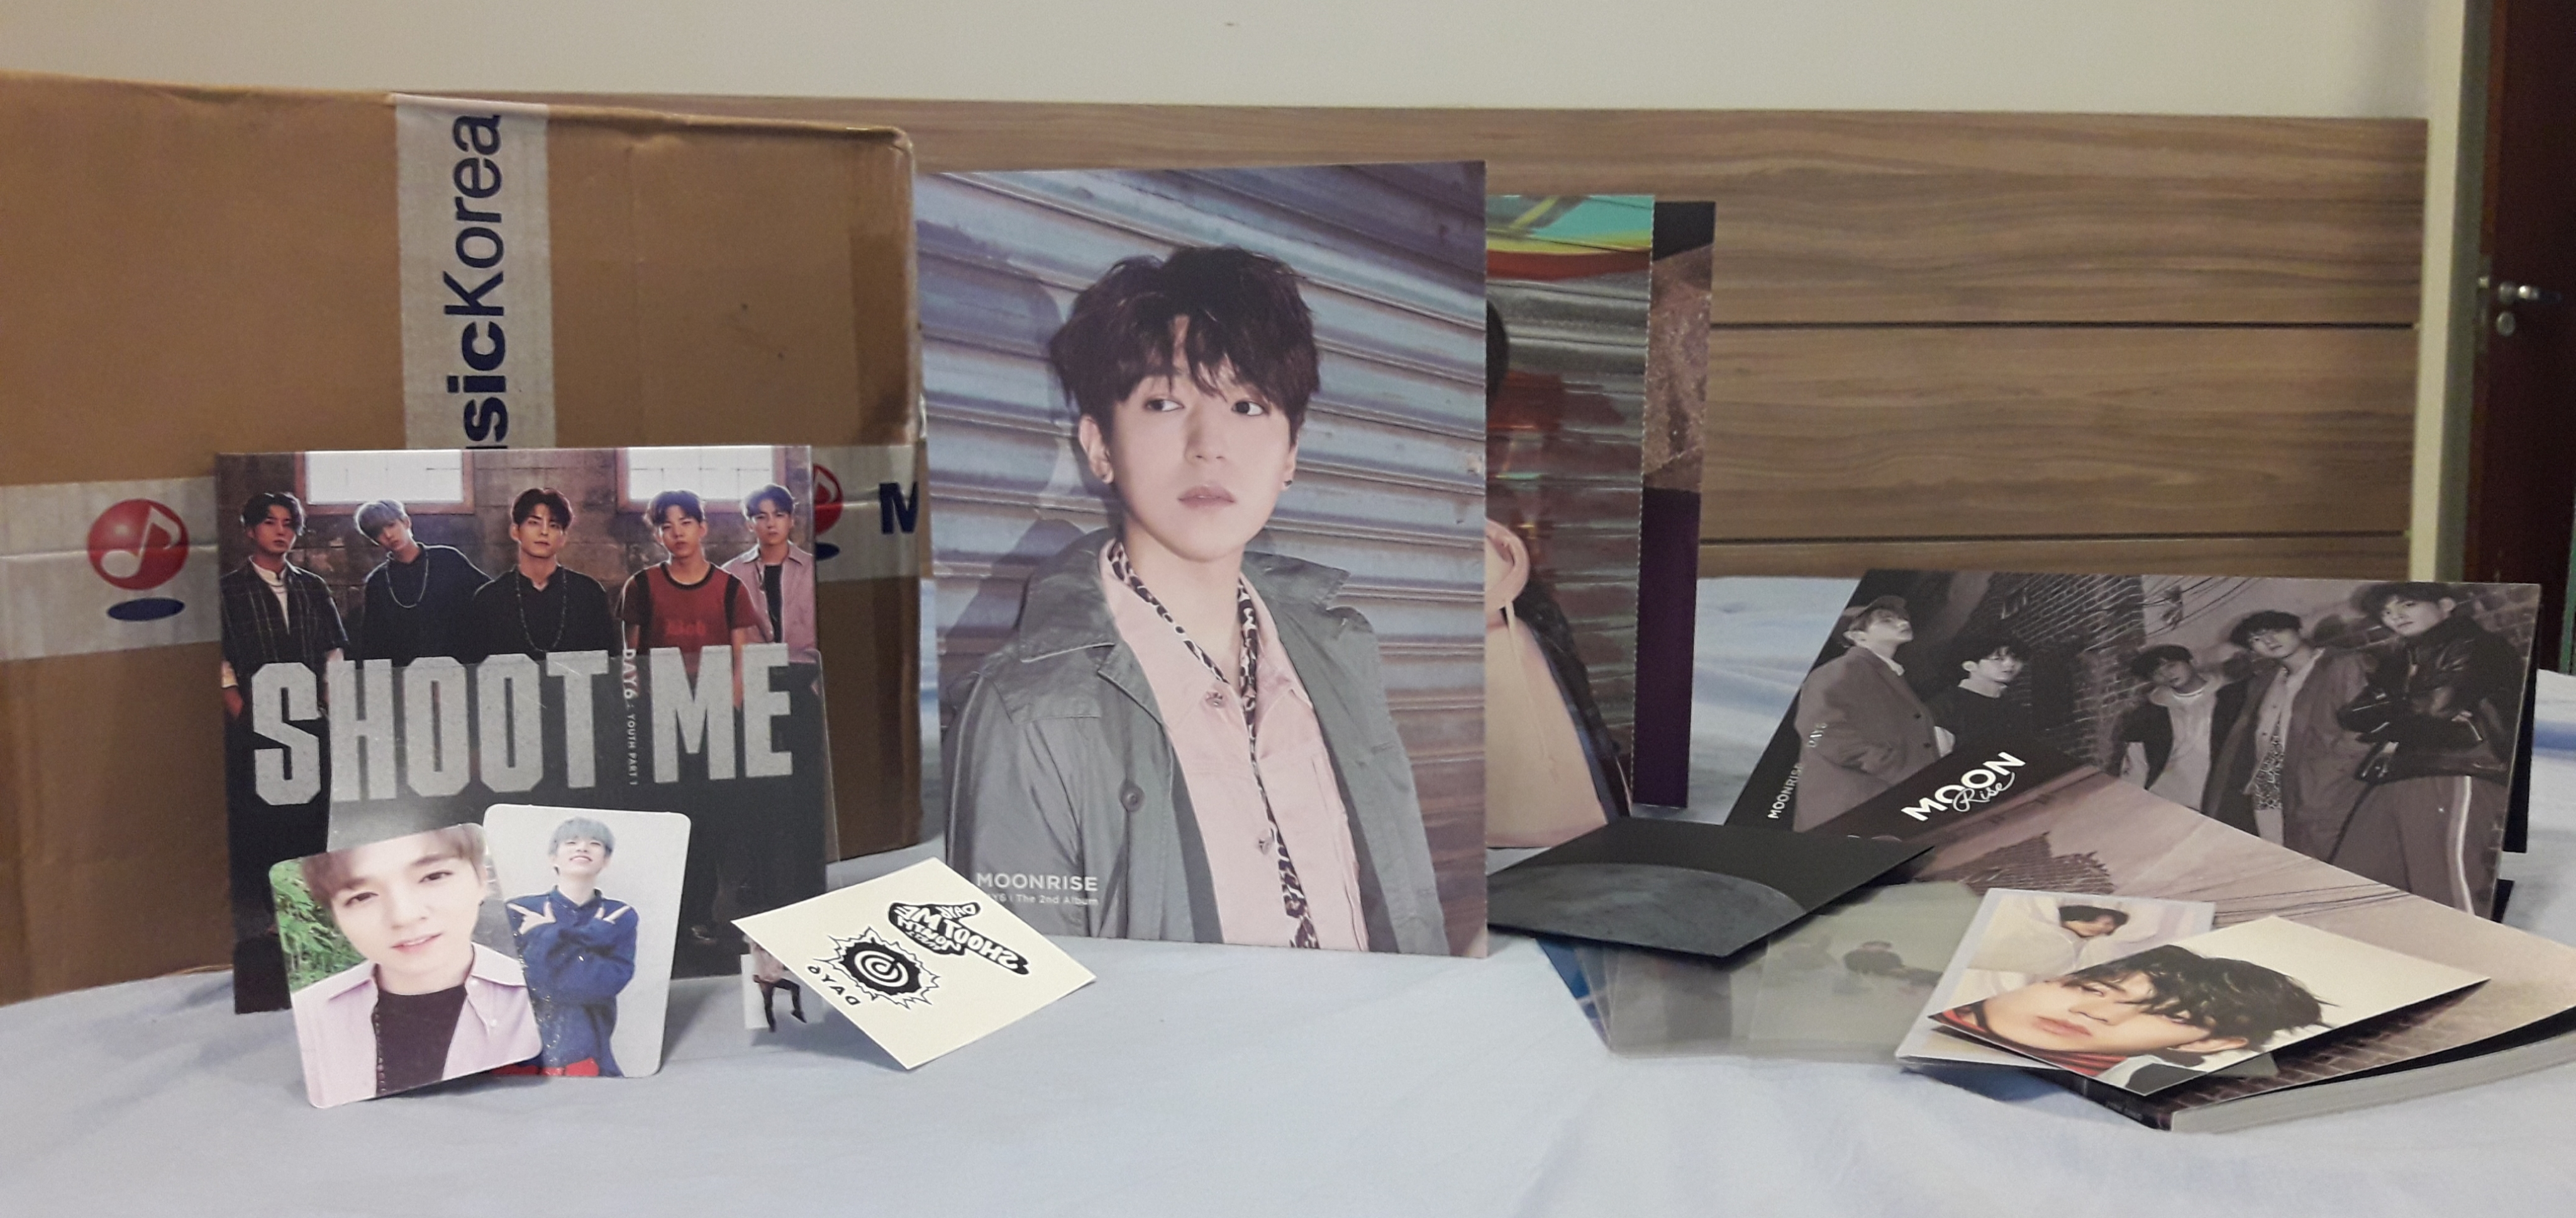 DAY6 Bullet+Trigger ver. SET Shoot Me : Youth Part 1 2CD+2Poster+Free Gift 